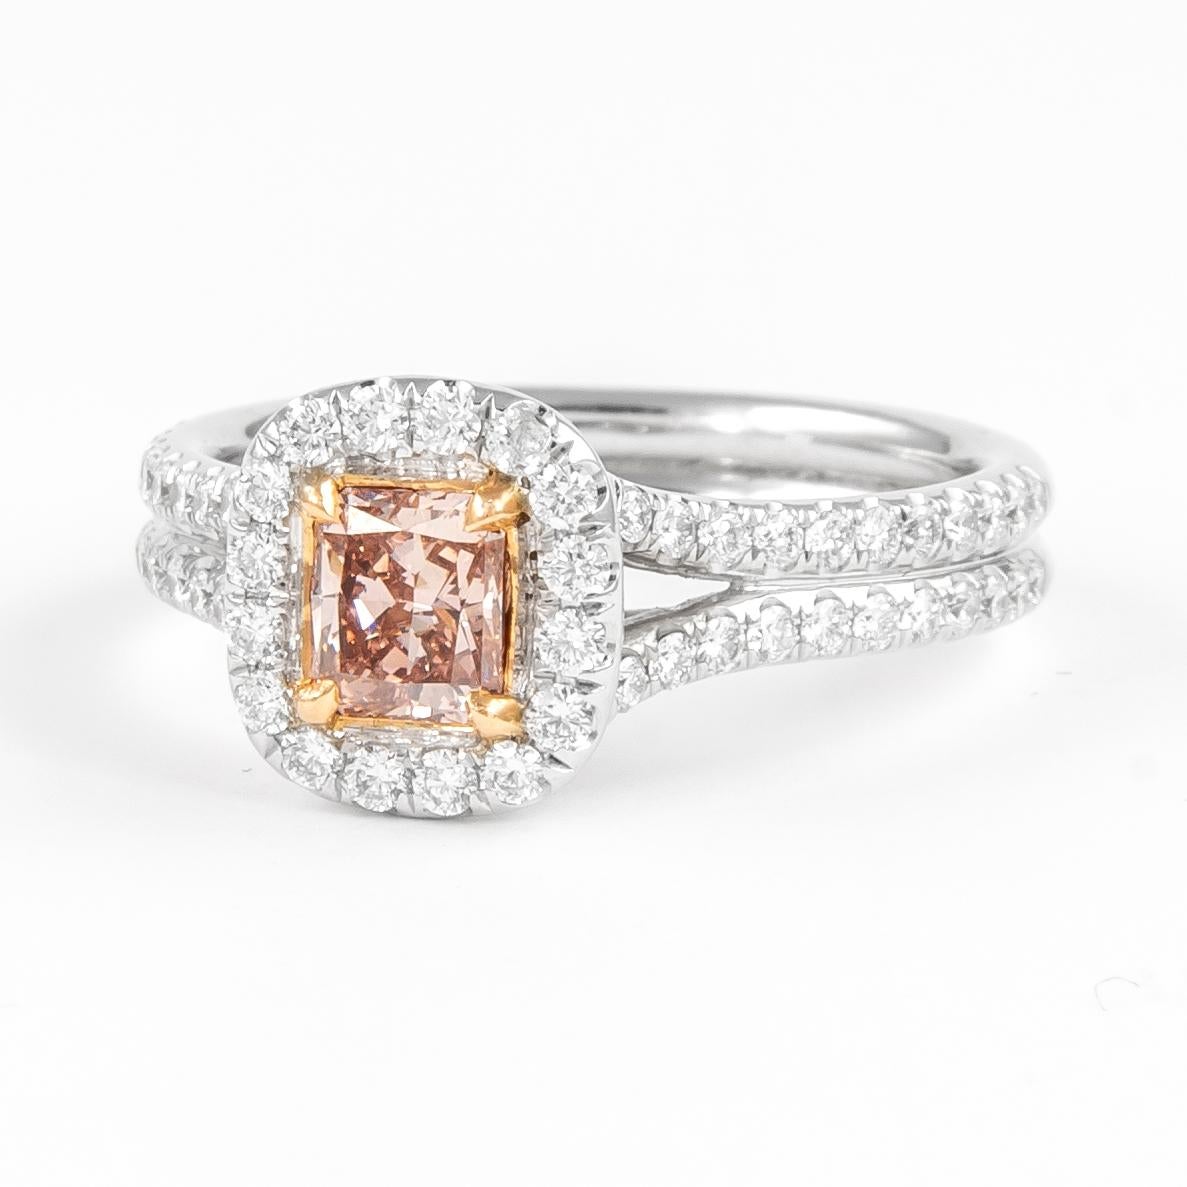 Radiant Cut Alexander GIA Certified 0.92ctt Fancy Brown Pink Diamond Ring 18k Gold For Sale